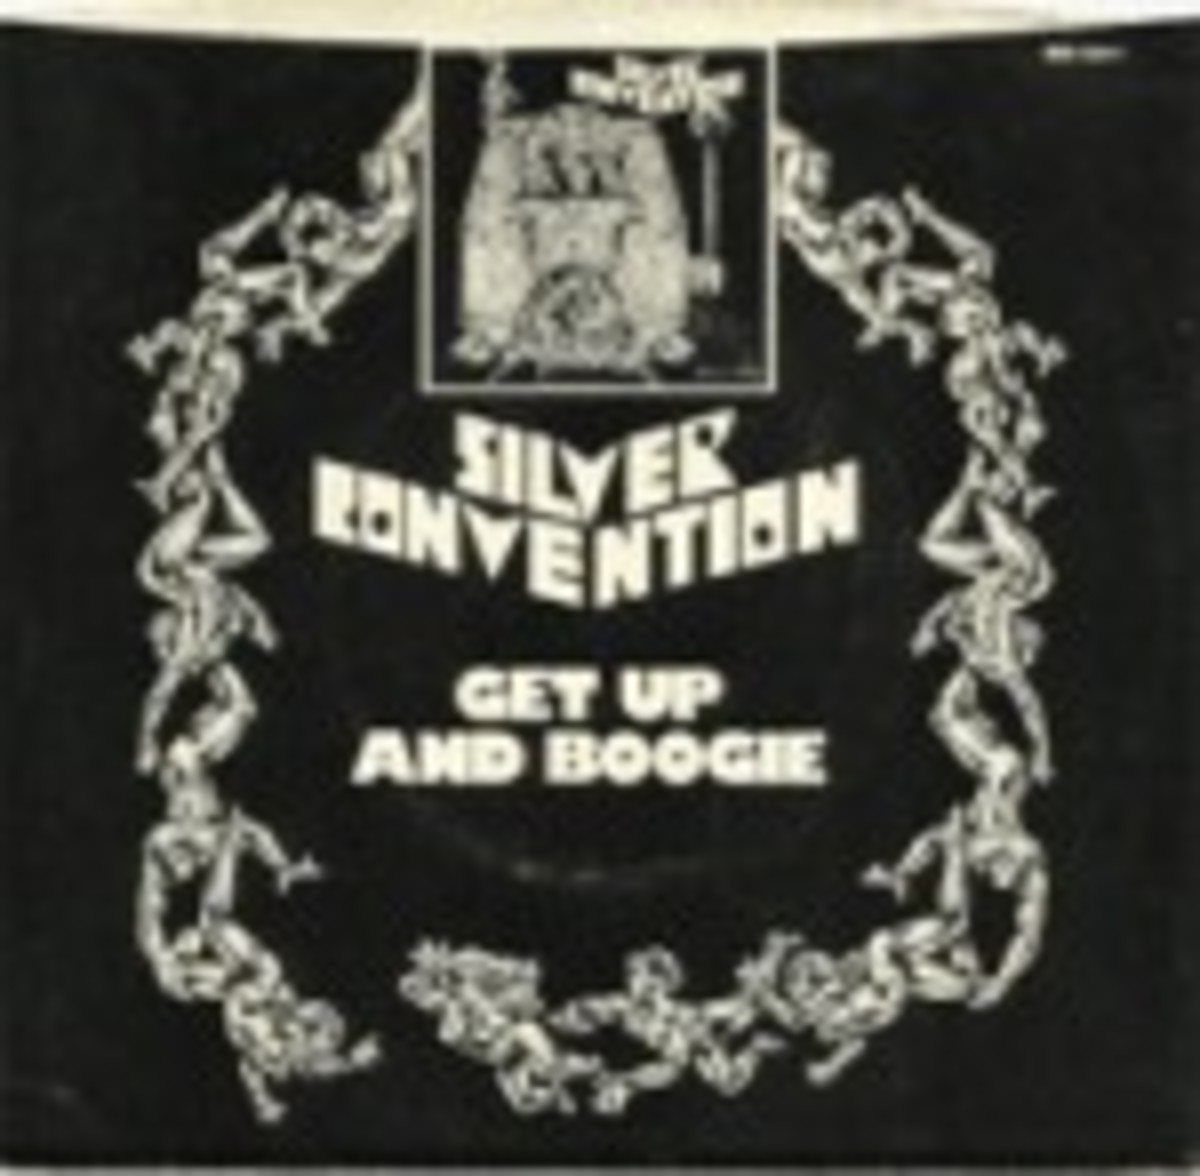 Silver Convention Get Up And Boogie